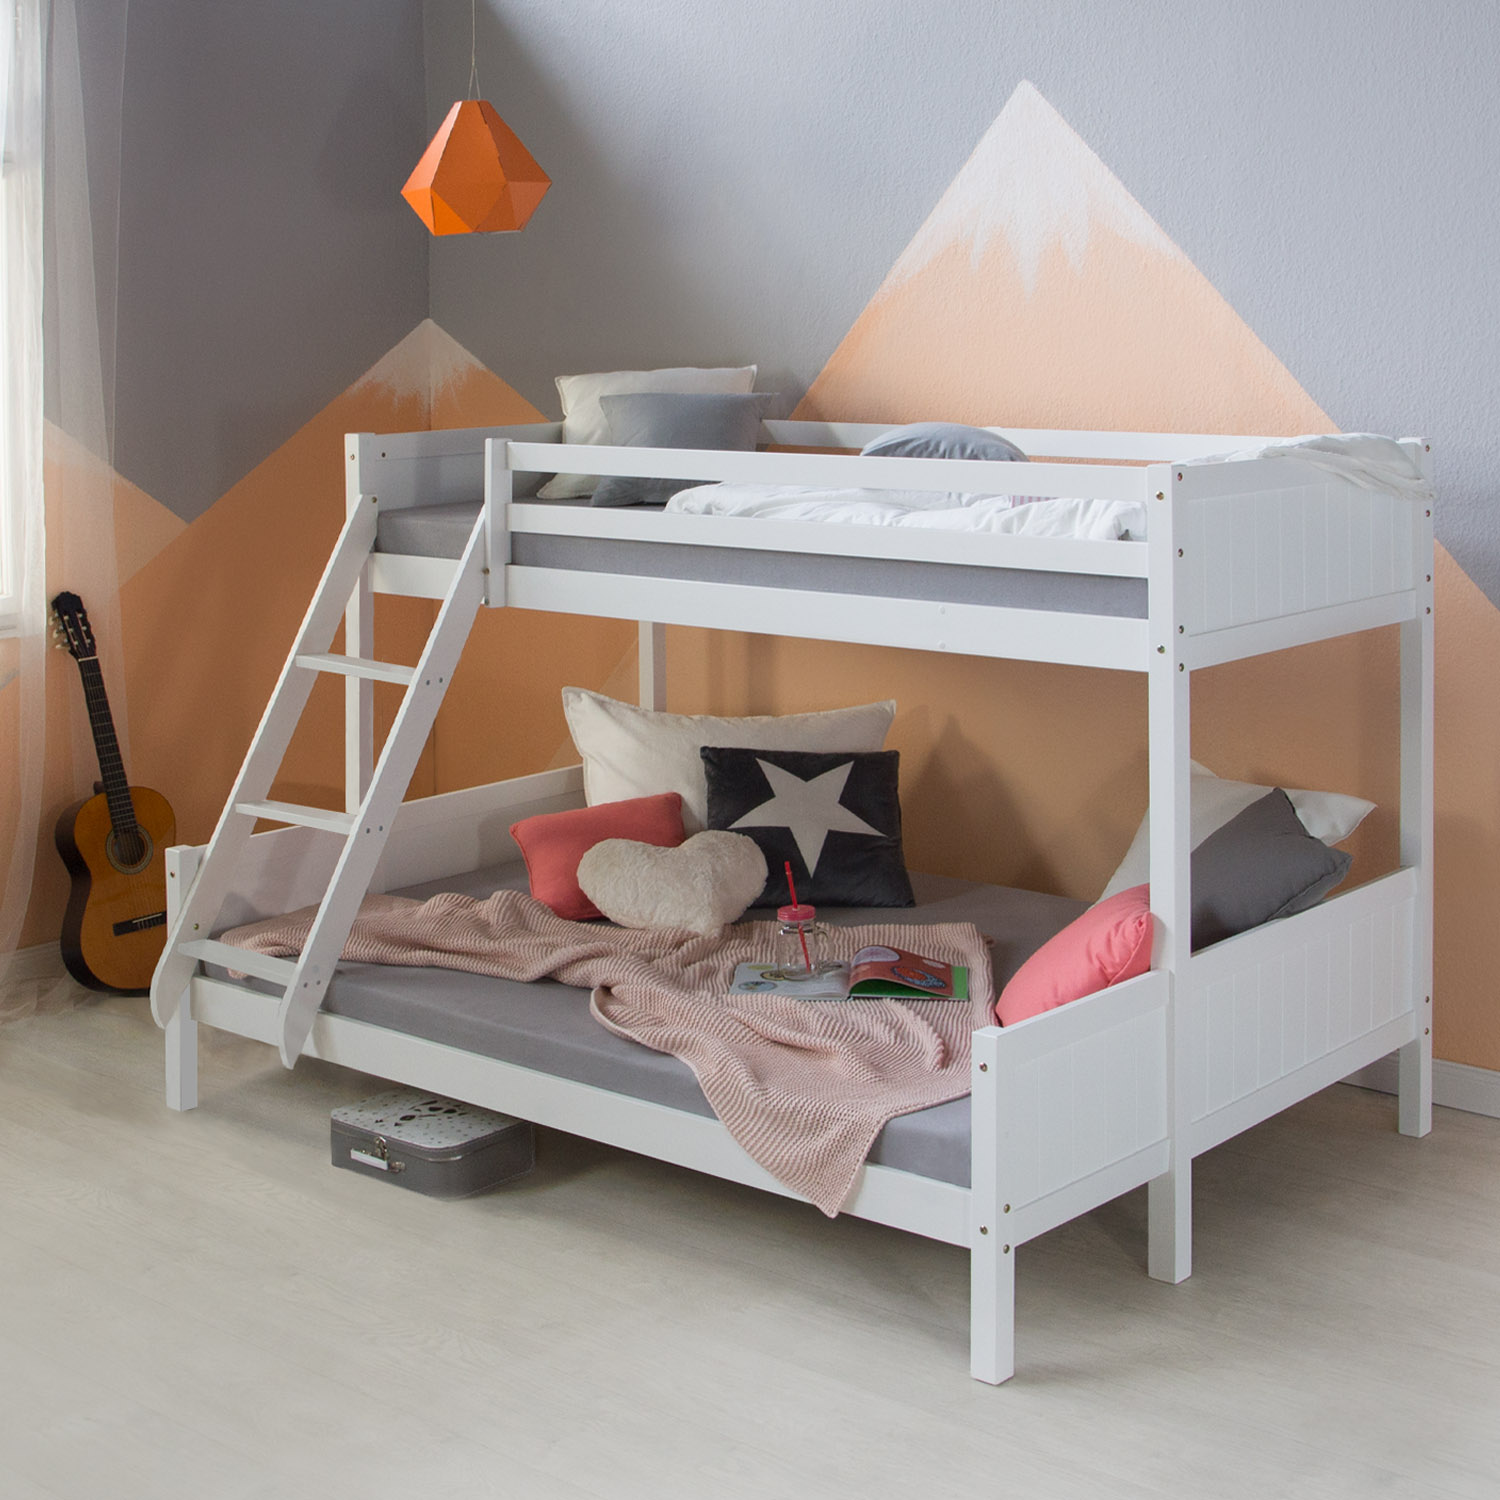 Children´s Bed Bunk Bed 90x200 and 140x200 High Sleeper Cot White Wood with Slats 2 Matresses